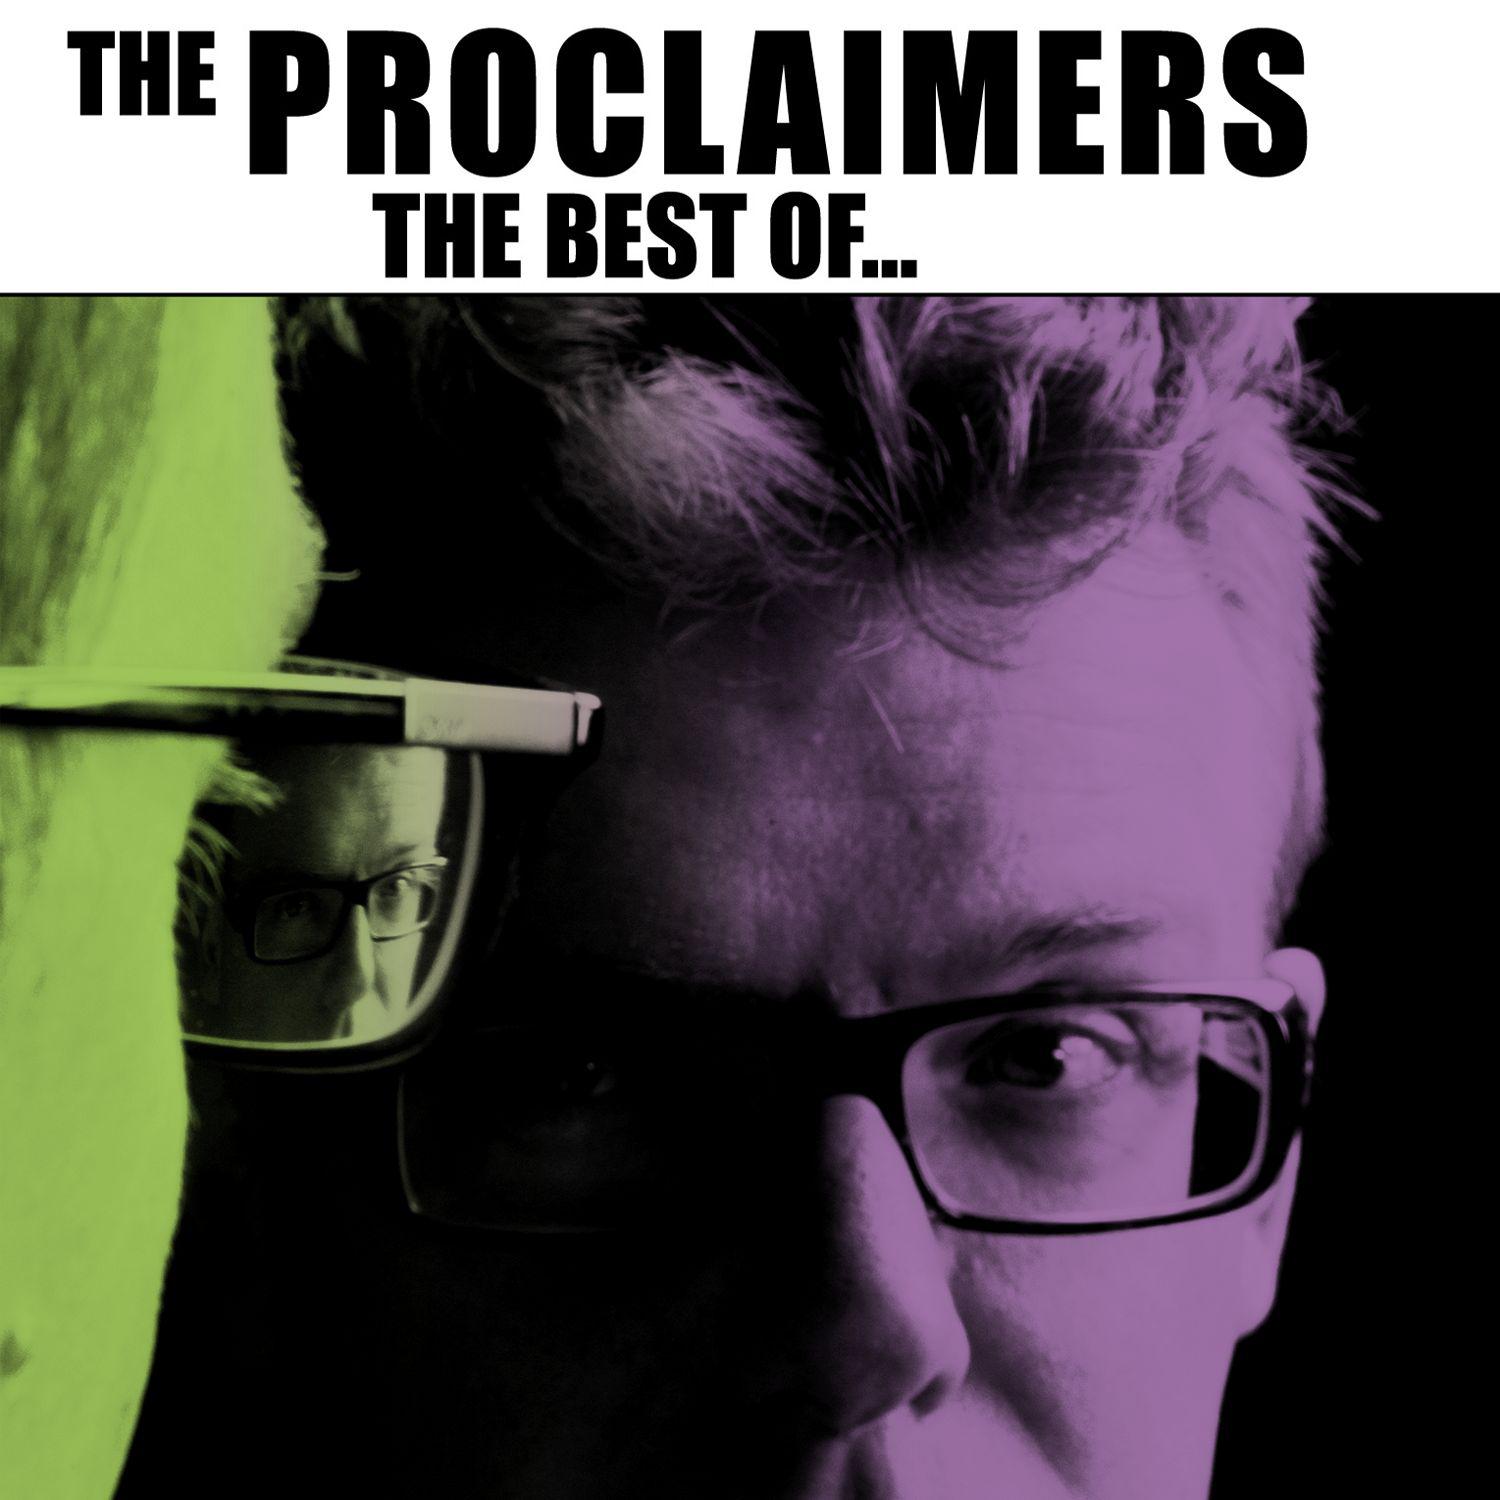 The Proclaimers - I'm Gonna Be (500 Miles) [feat. Brian Potter & Andy Pipkin]